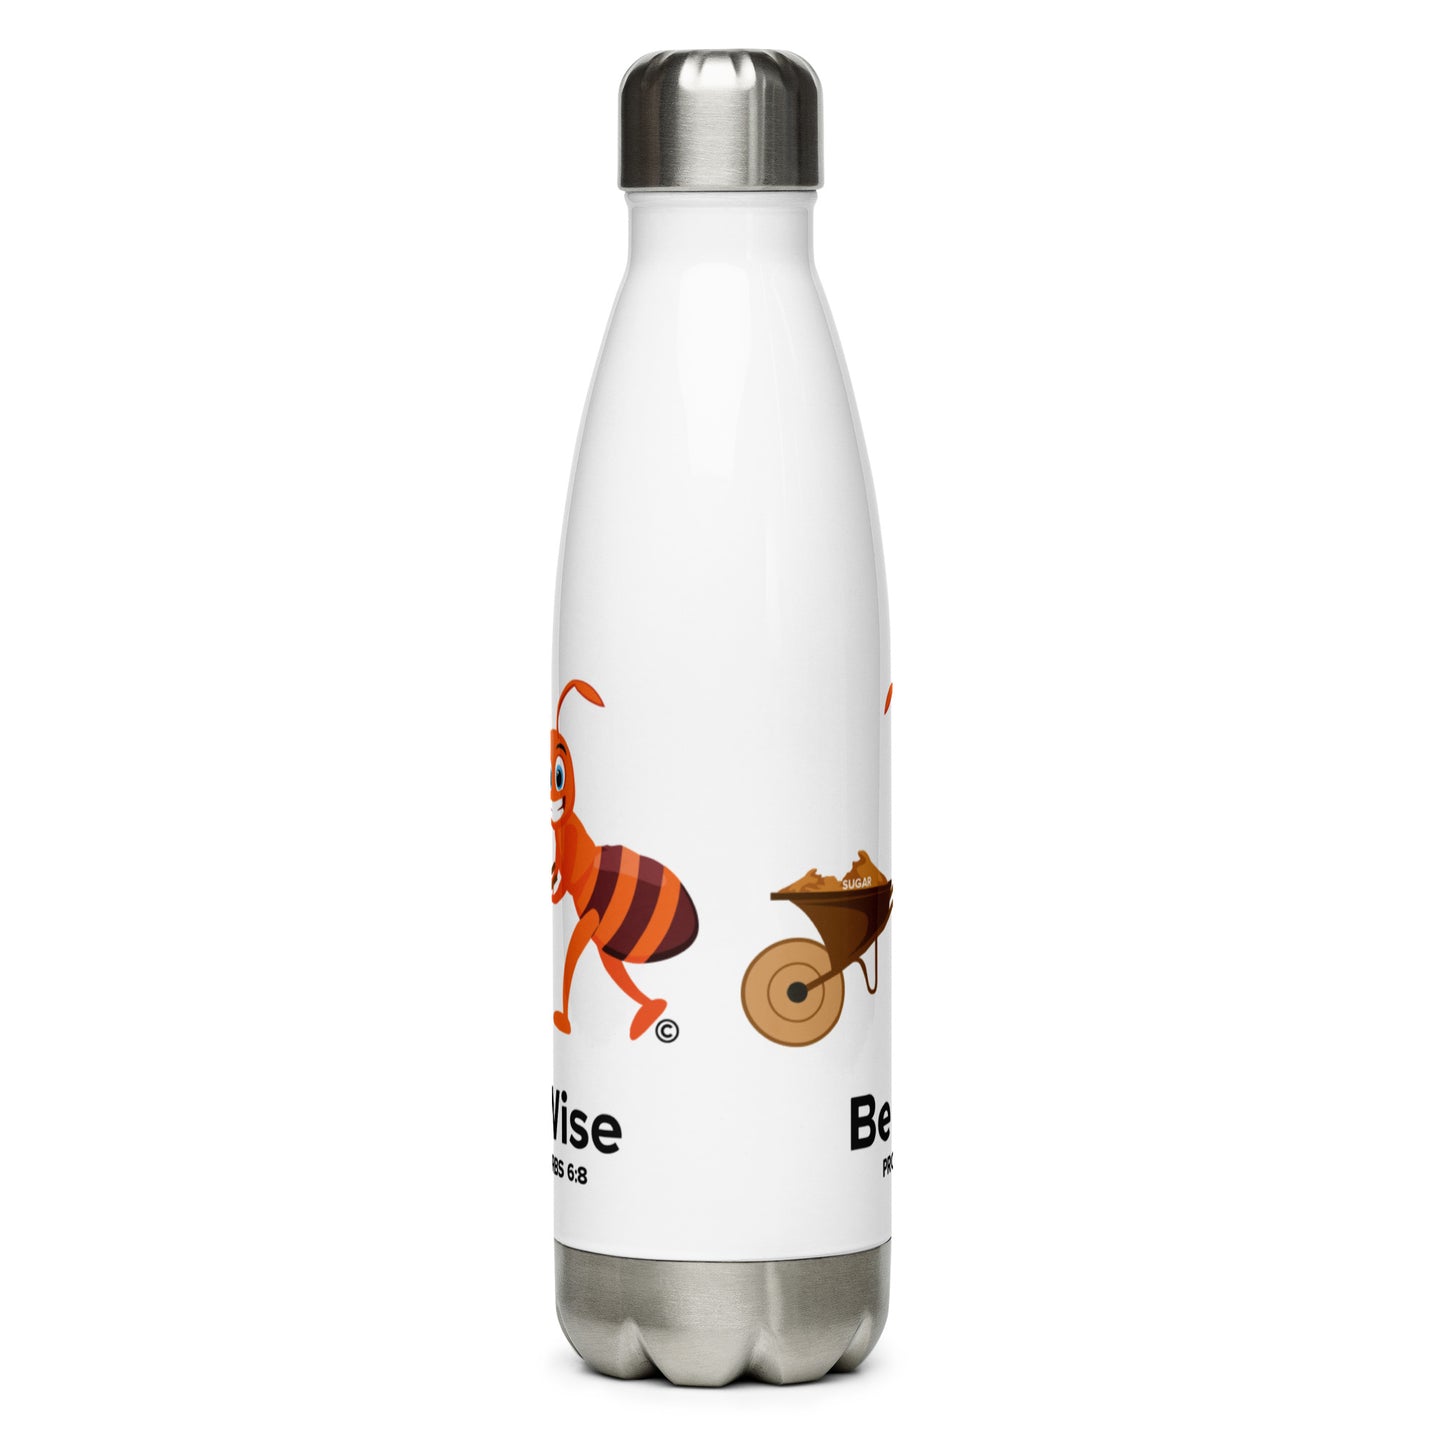 Be Wise Stainless Steel Water Bottle